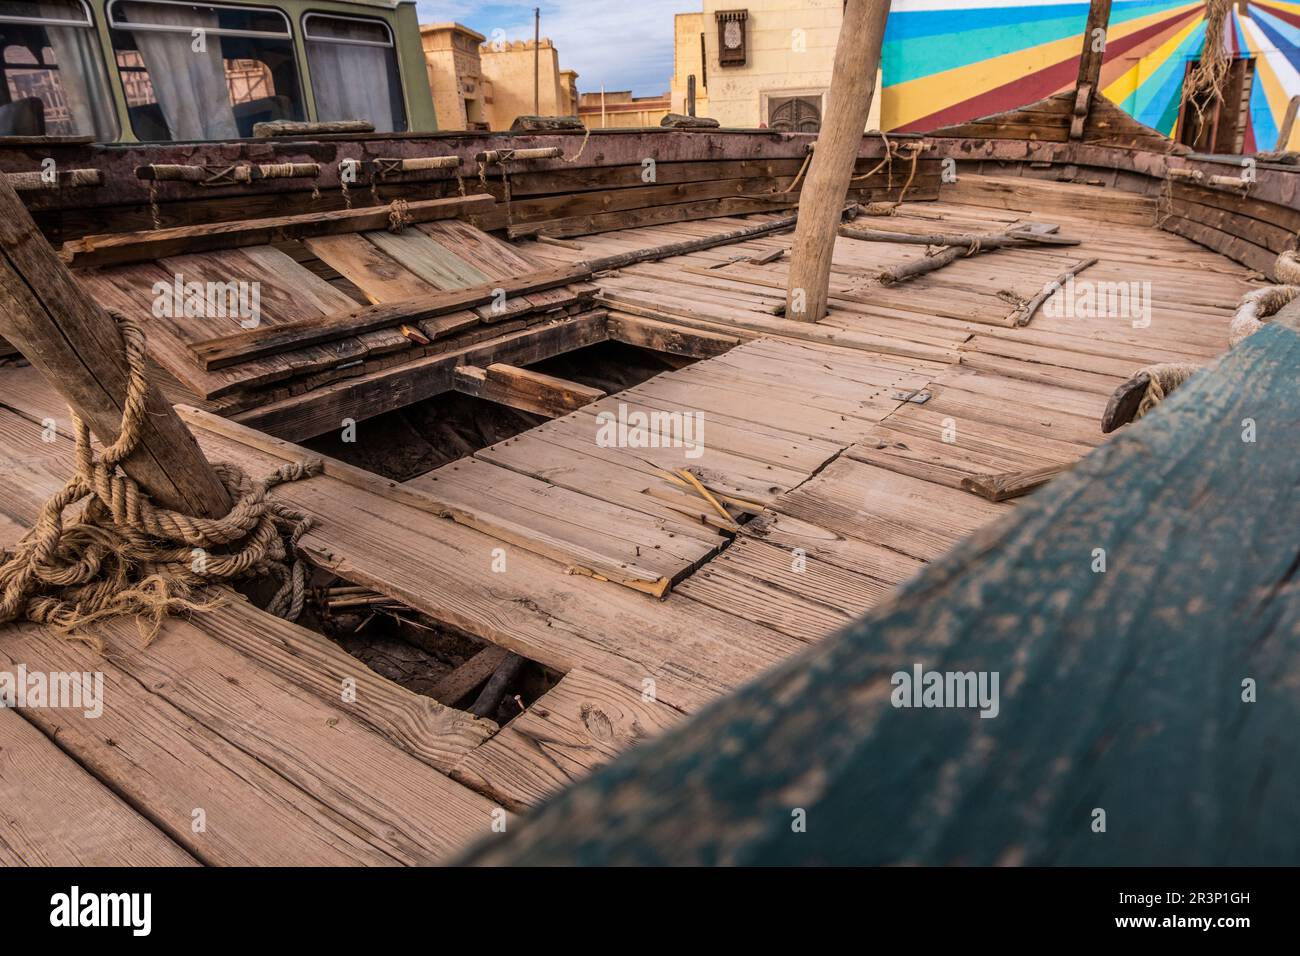 Abandoned wood boat in the middle of the desert in Morocco Stock Photo